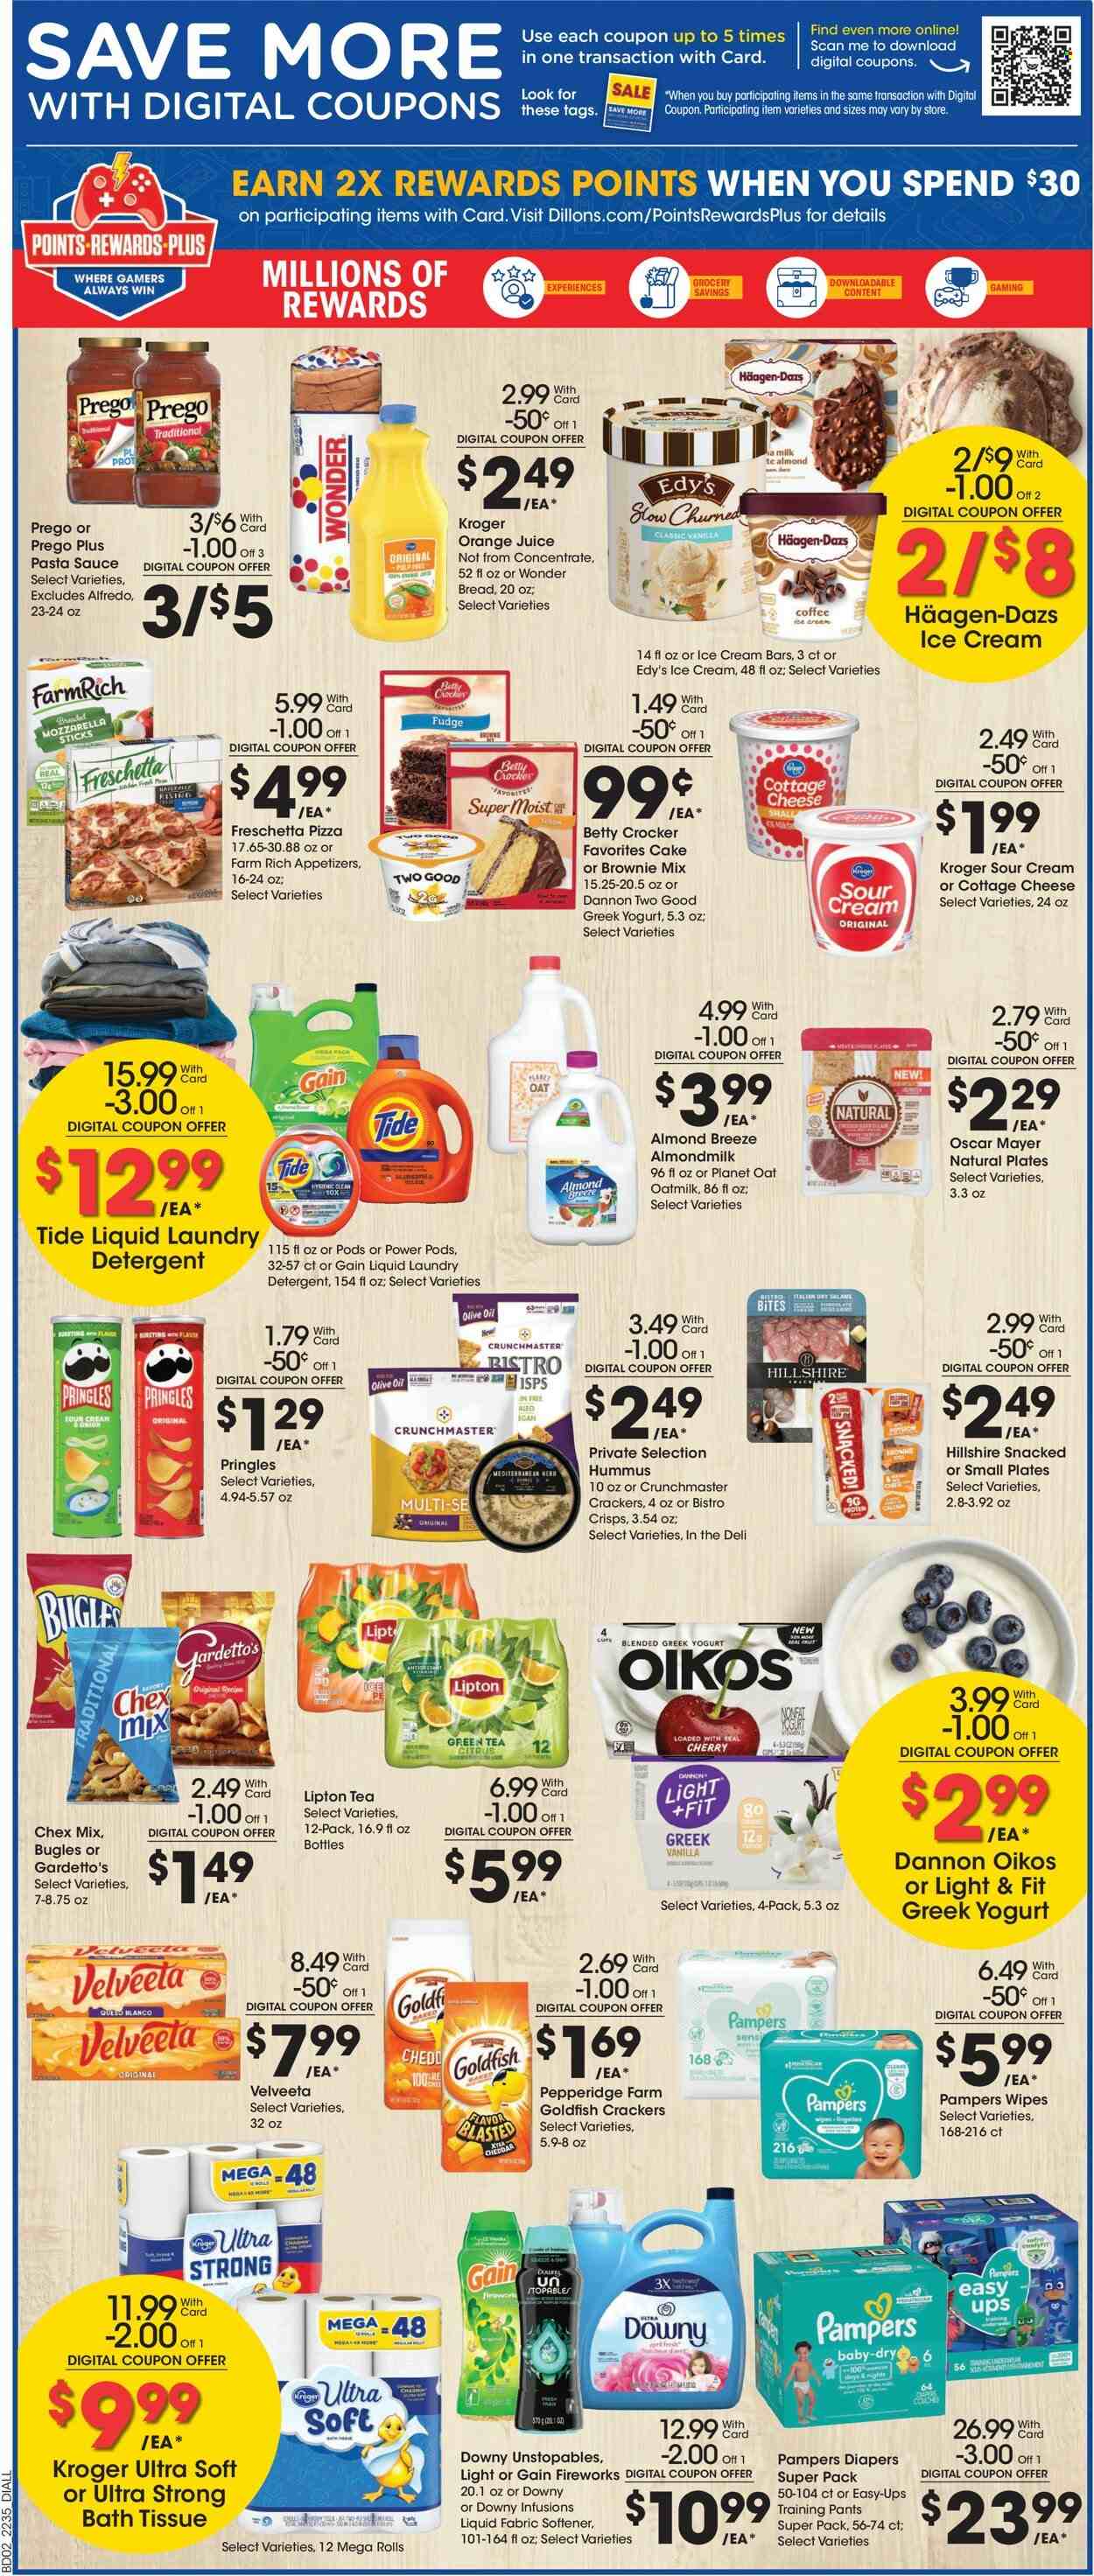 thumbnail - Dillons Flyer - 09/28/2022 - 10/04/2022 - Sales products - cake, brownie mix, cherries, pizza, pasta sauce, sauce, Oscar Mayer, hummus, cottage cheese, greek yoghurt, yoghurt, Oikos, Dannon, almond milk, milk, Almond Breeze, oat milk, sour cream, ice cream, ice cream bars, Häagen-Dazs, fudge, crackers, Pringles, Goldfish, Chex Mix, olive oil, oil, orange juice, juice, Lipton, green tea, tea, coffee, wipes, Pampers, pants, nappies, baby pants, bath tissue, detergent, Gain, Tide, Unstopables, fabric softener, laundry detergent, Gain Fireworks, Downy Laundry, plate, cup. Page 3.